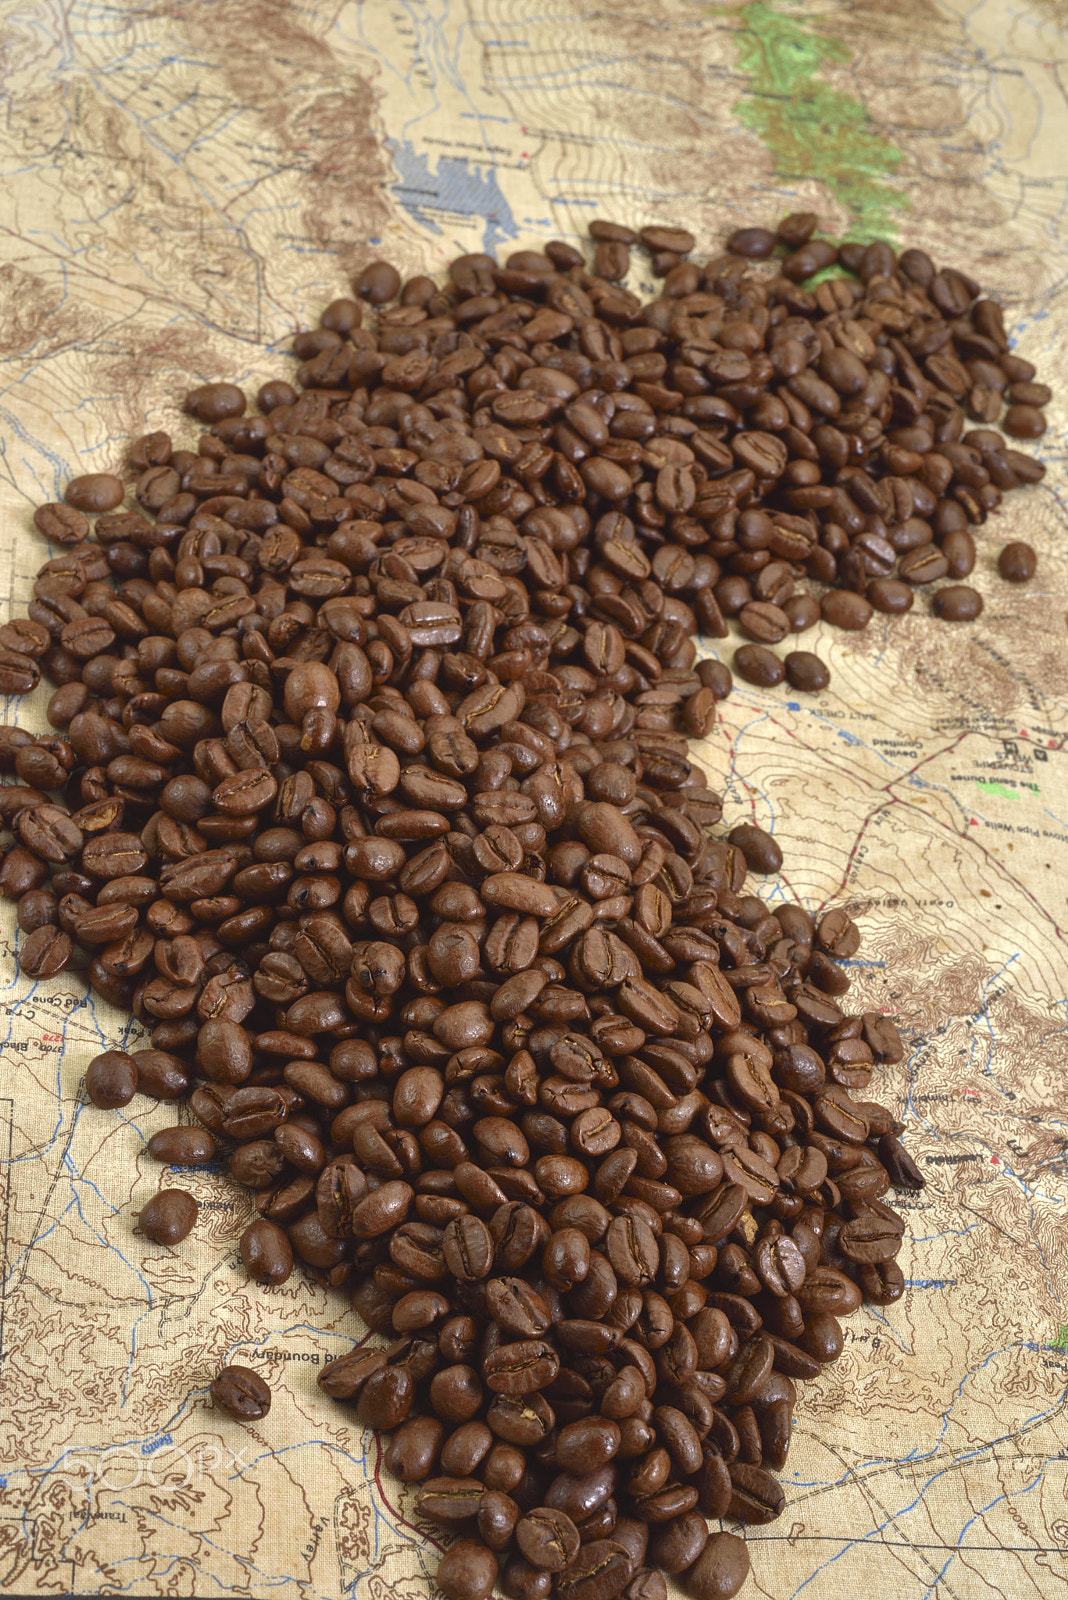 AF Micro-Nikkor 60mm f/2.8 sample photo. A map with roasted coffee beans photography